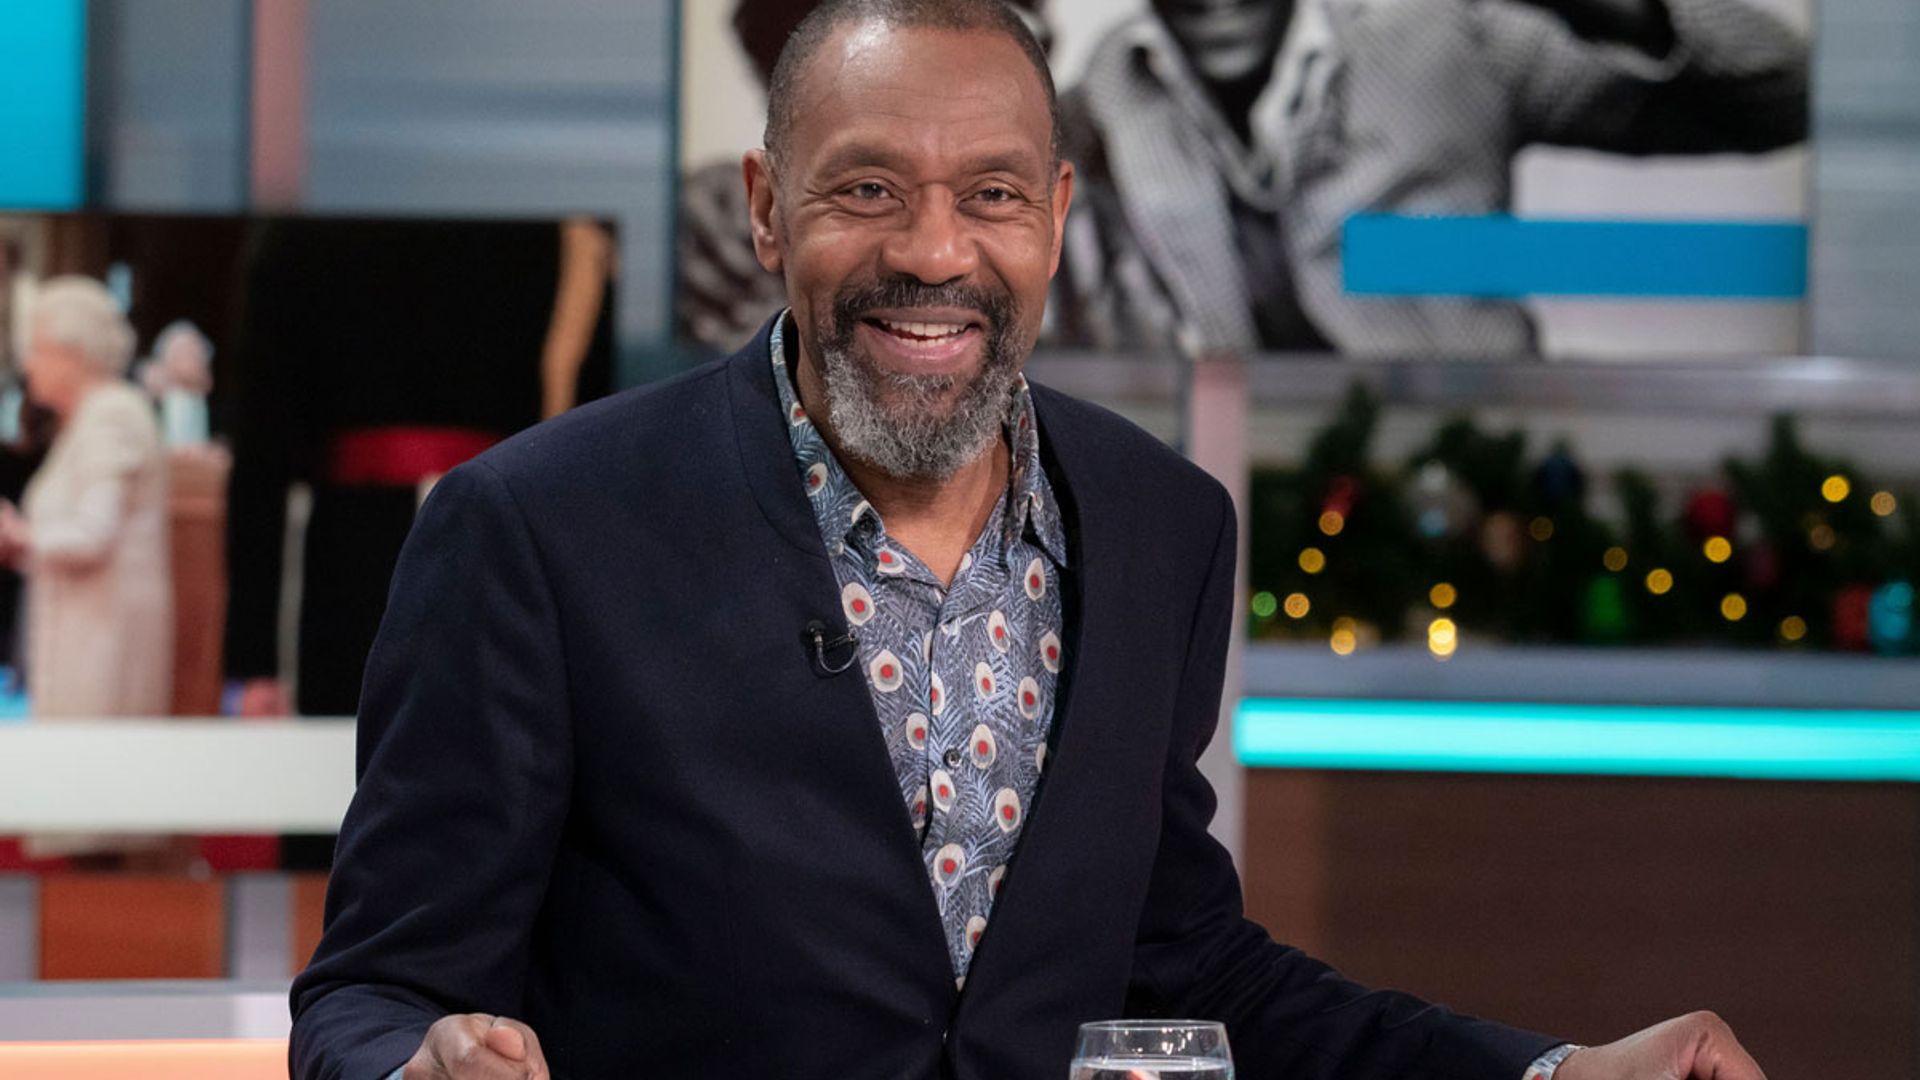 Sir Lenny Henry reveals secret to maintaining his trim physique